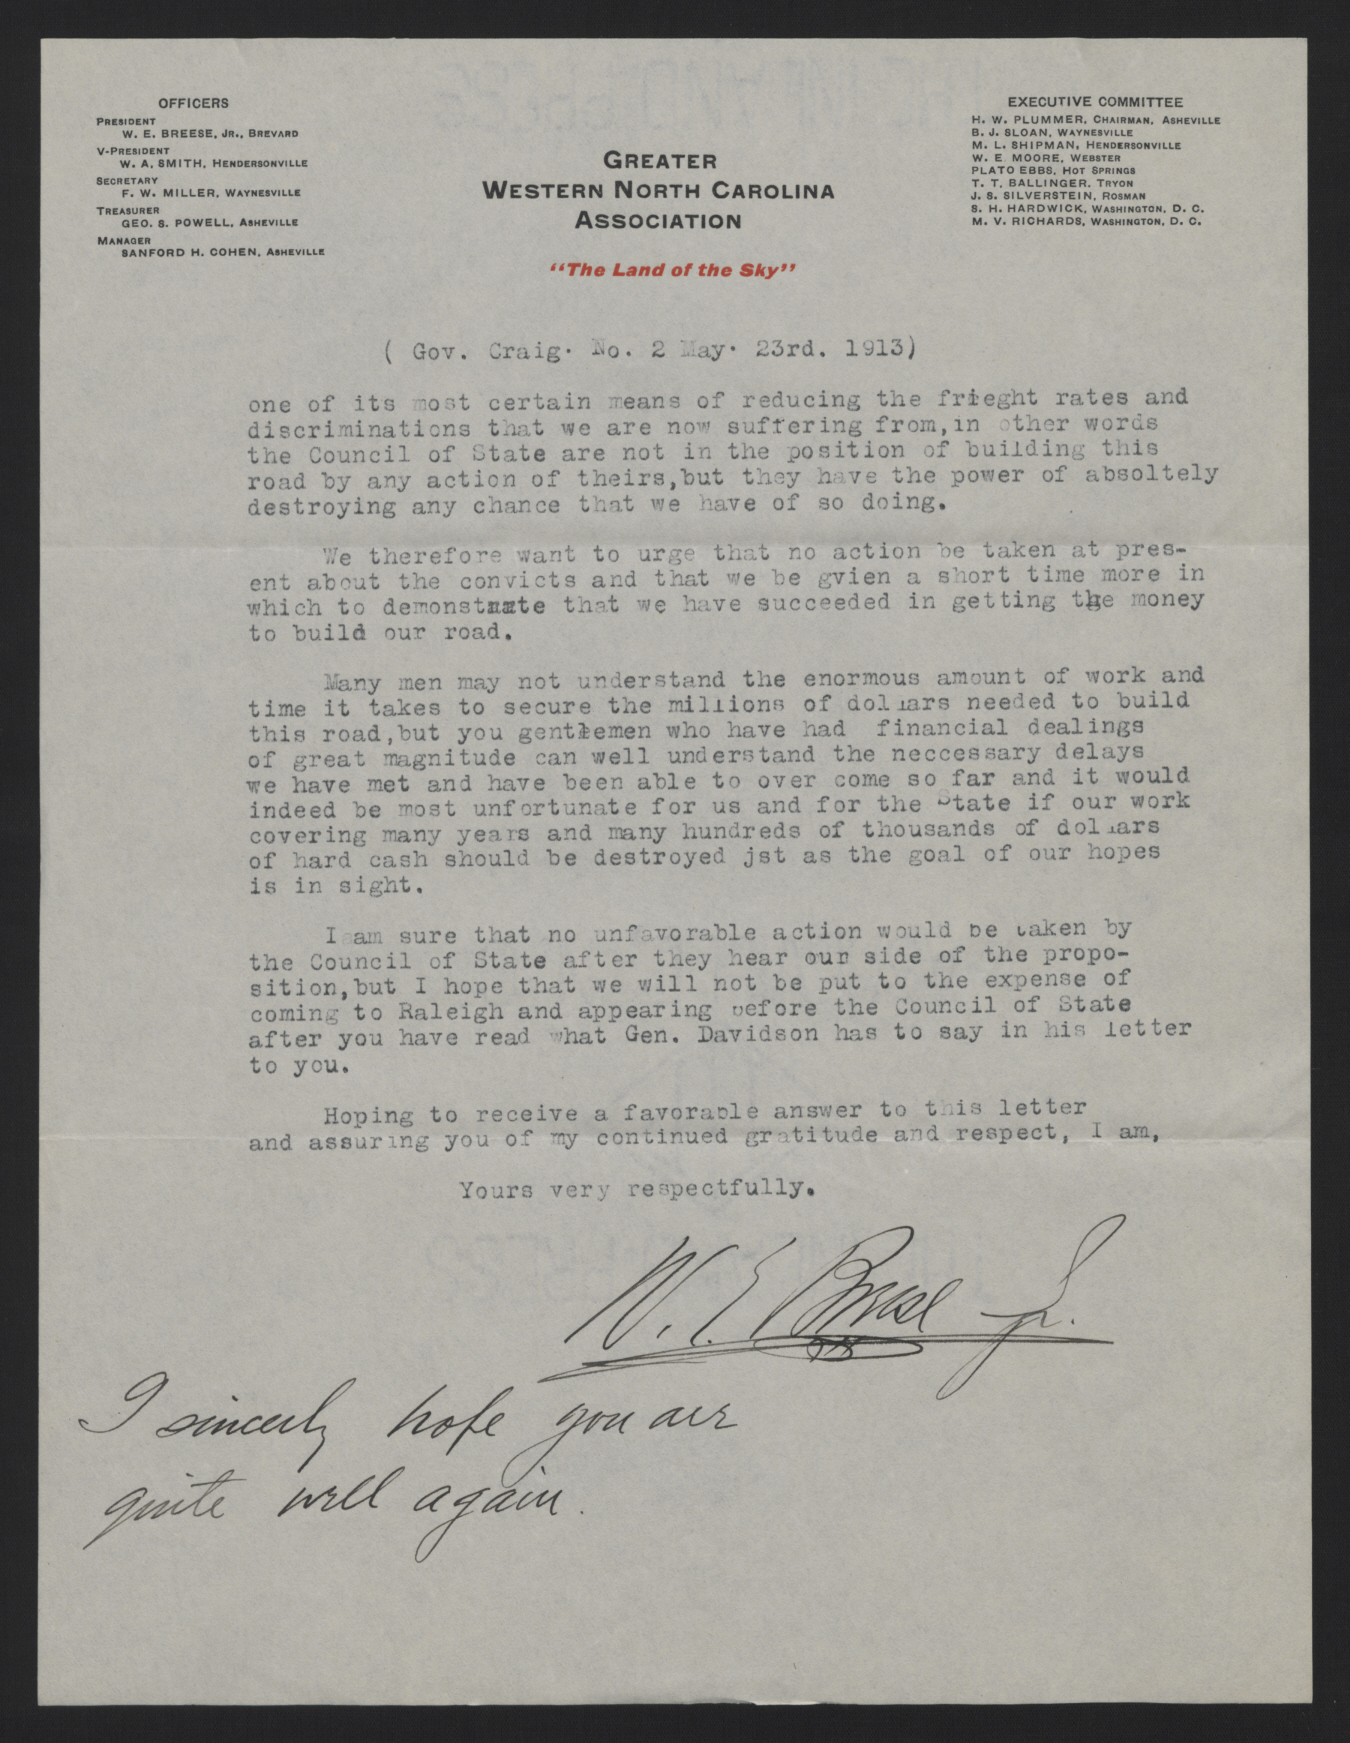 Letter from Breese to Craig, May 23, 1913, page 2